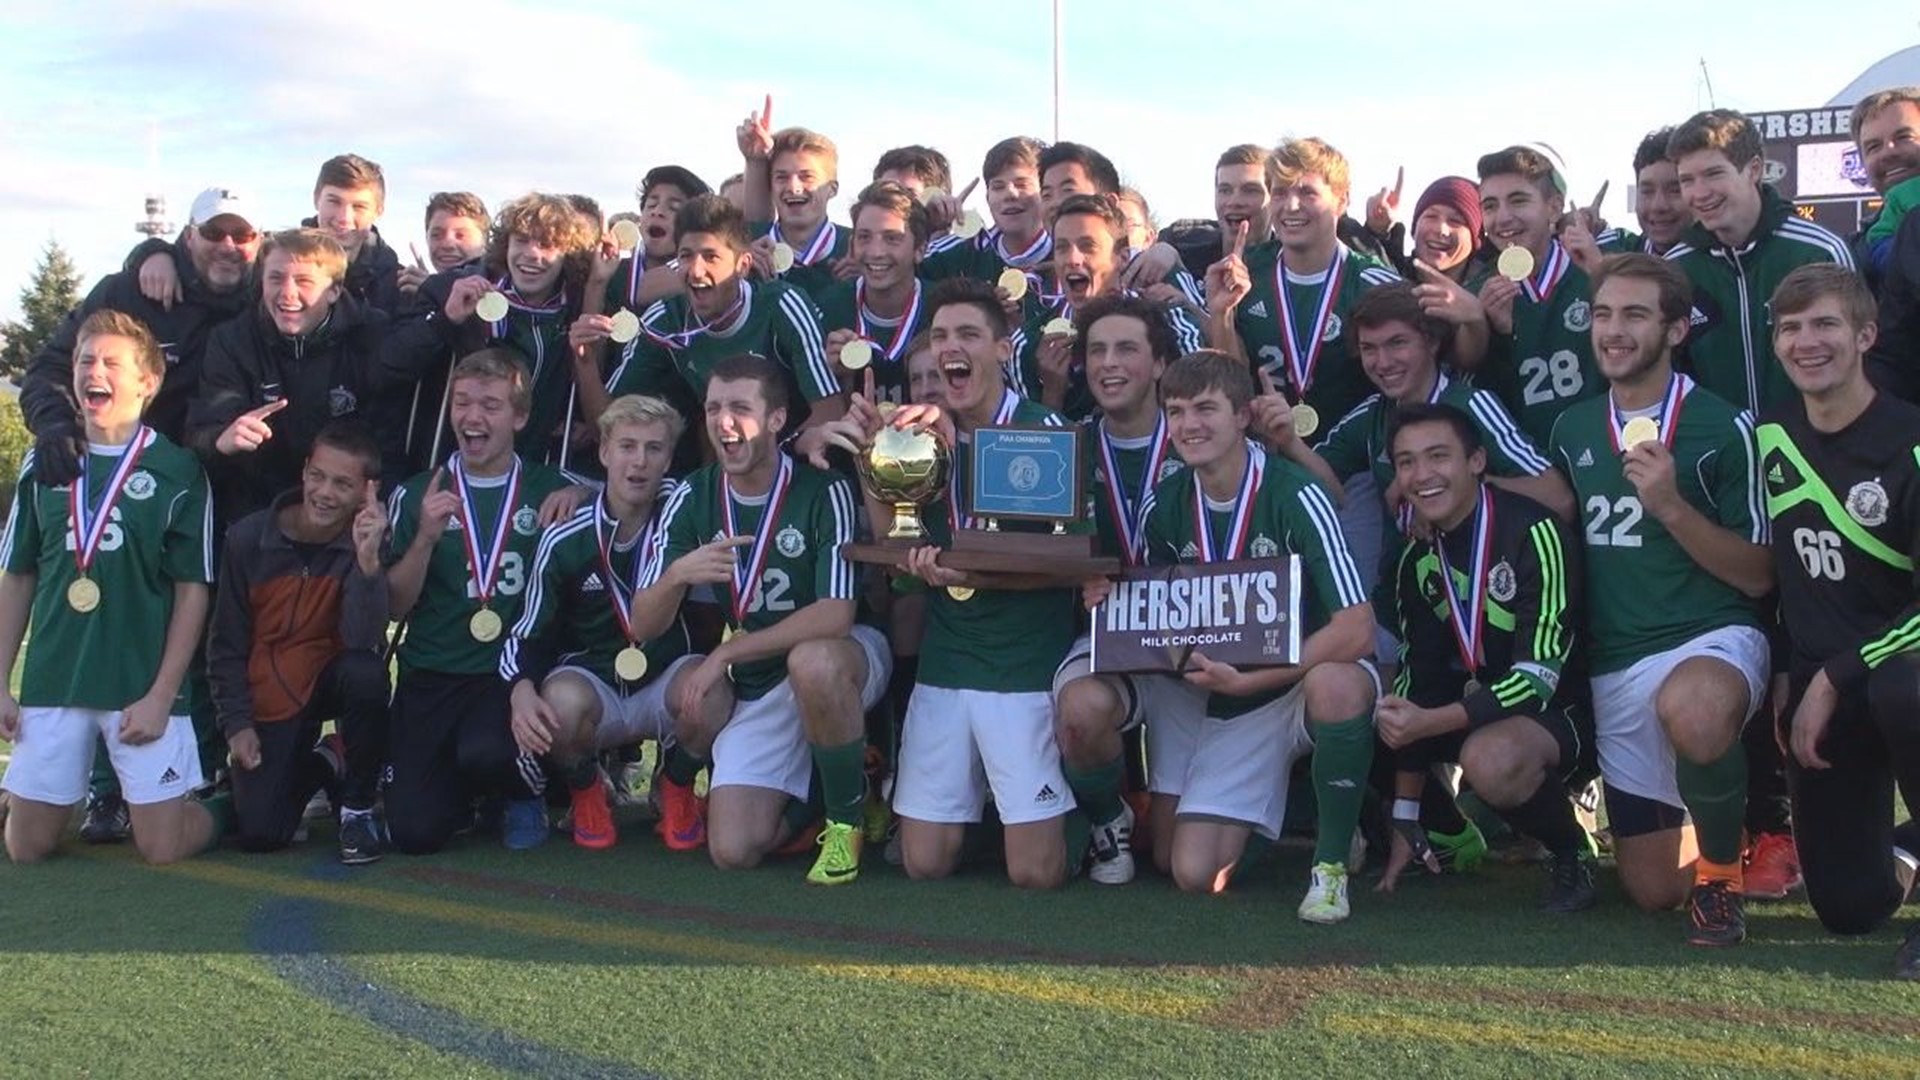 Lewisburg with their 3rd state title in boy's soccer in the last 6 years